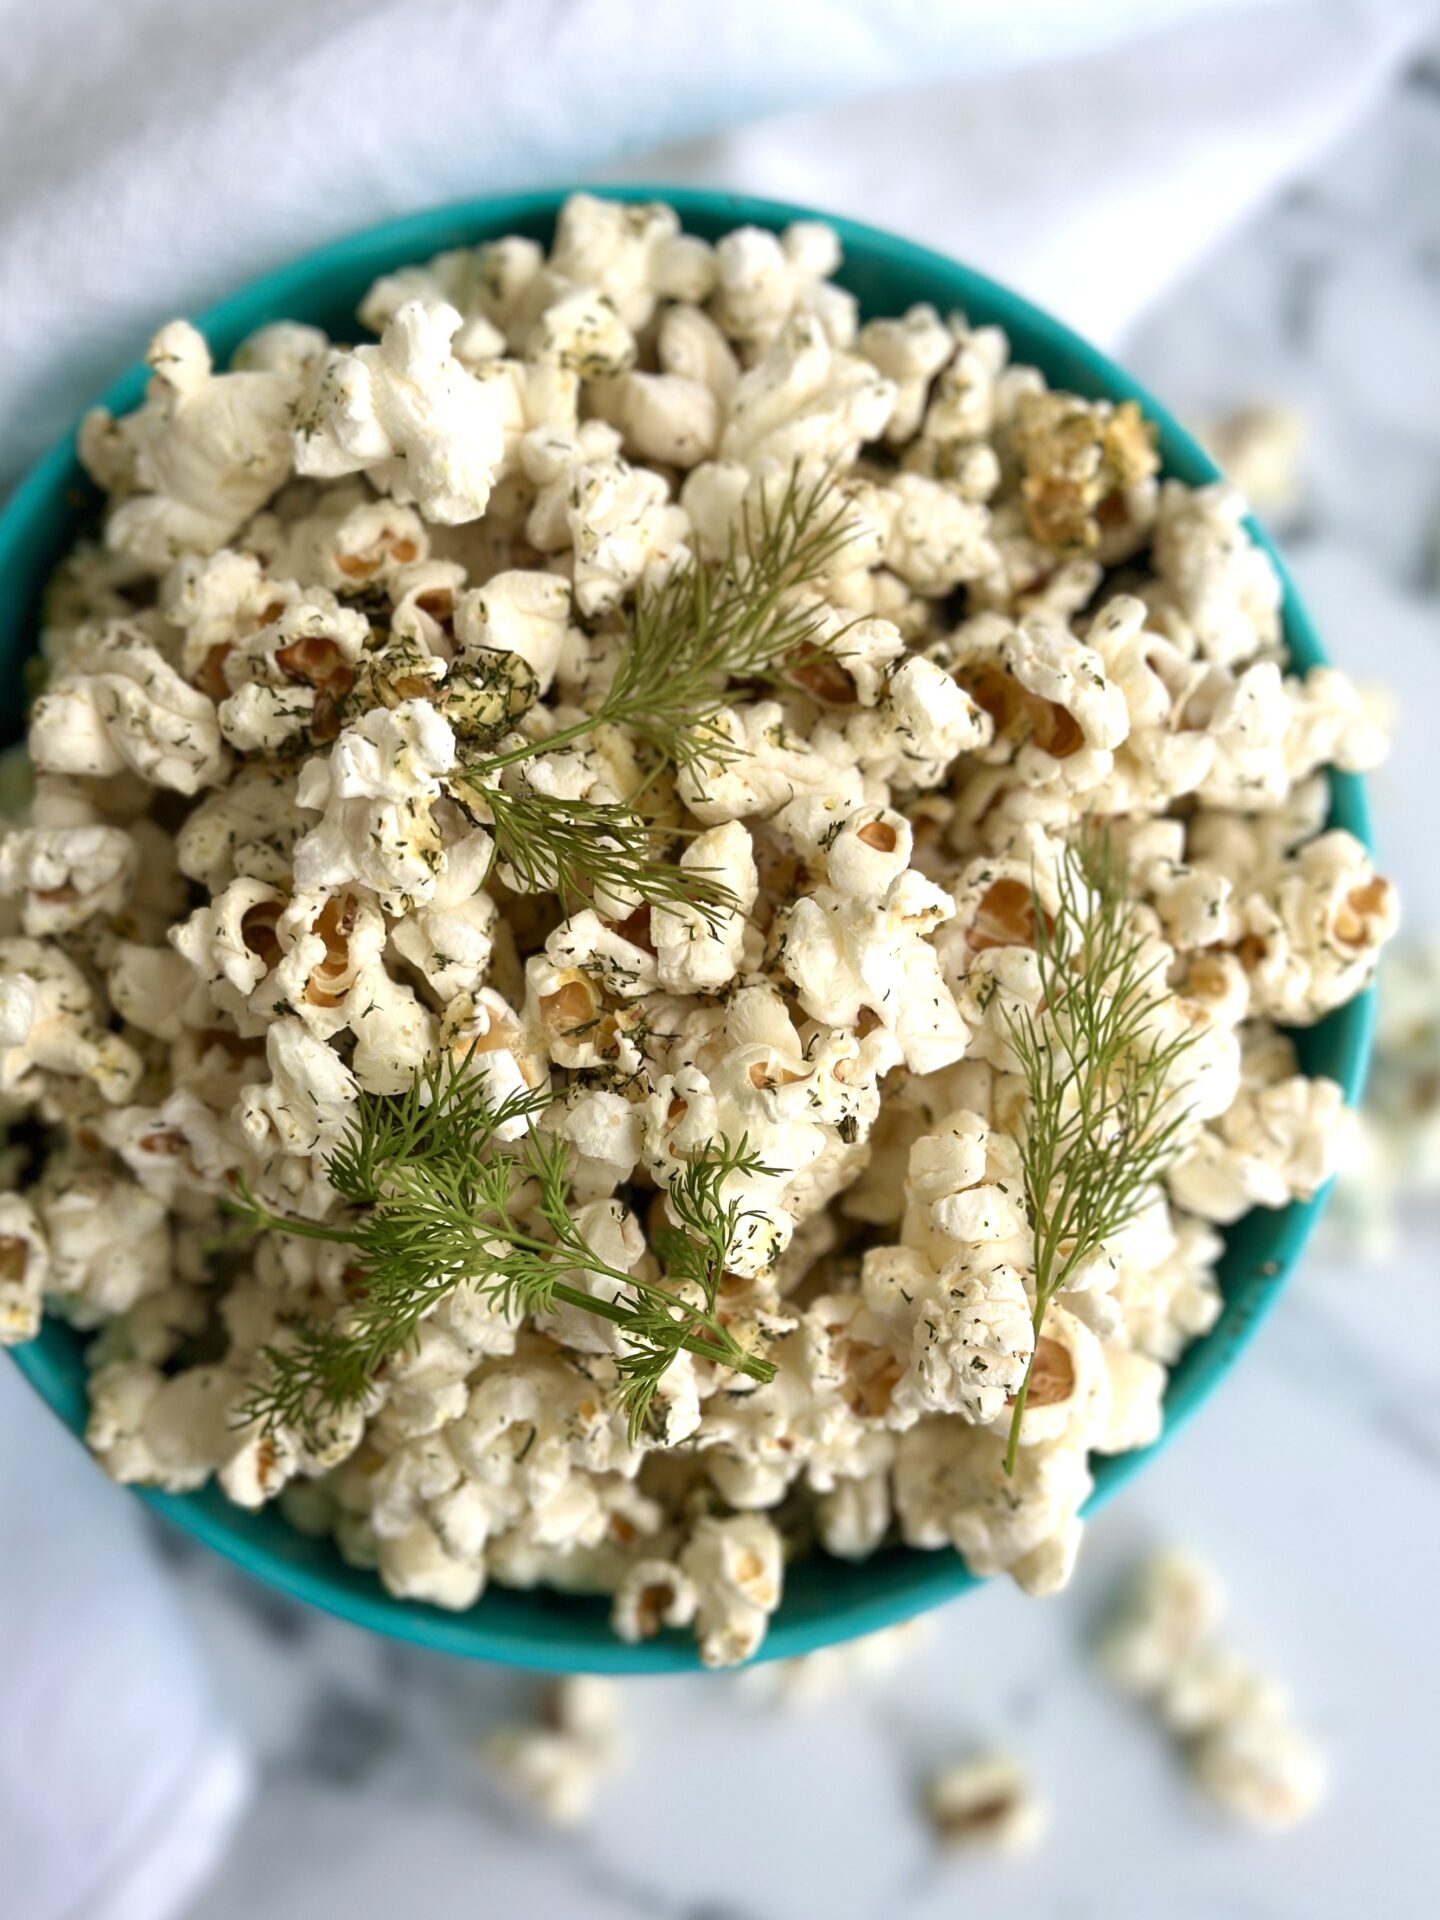 A bowl of Dill Pickle Popcorn is seen from above garnished with fresh dill sprigs and set on a white marble table